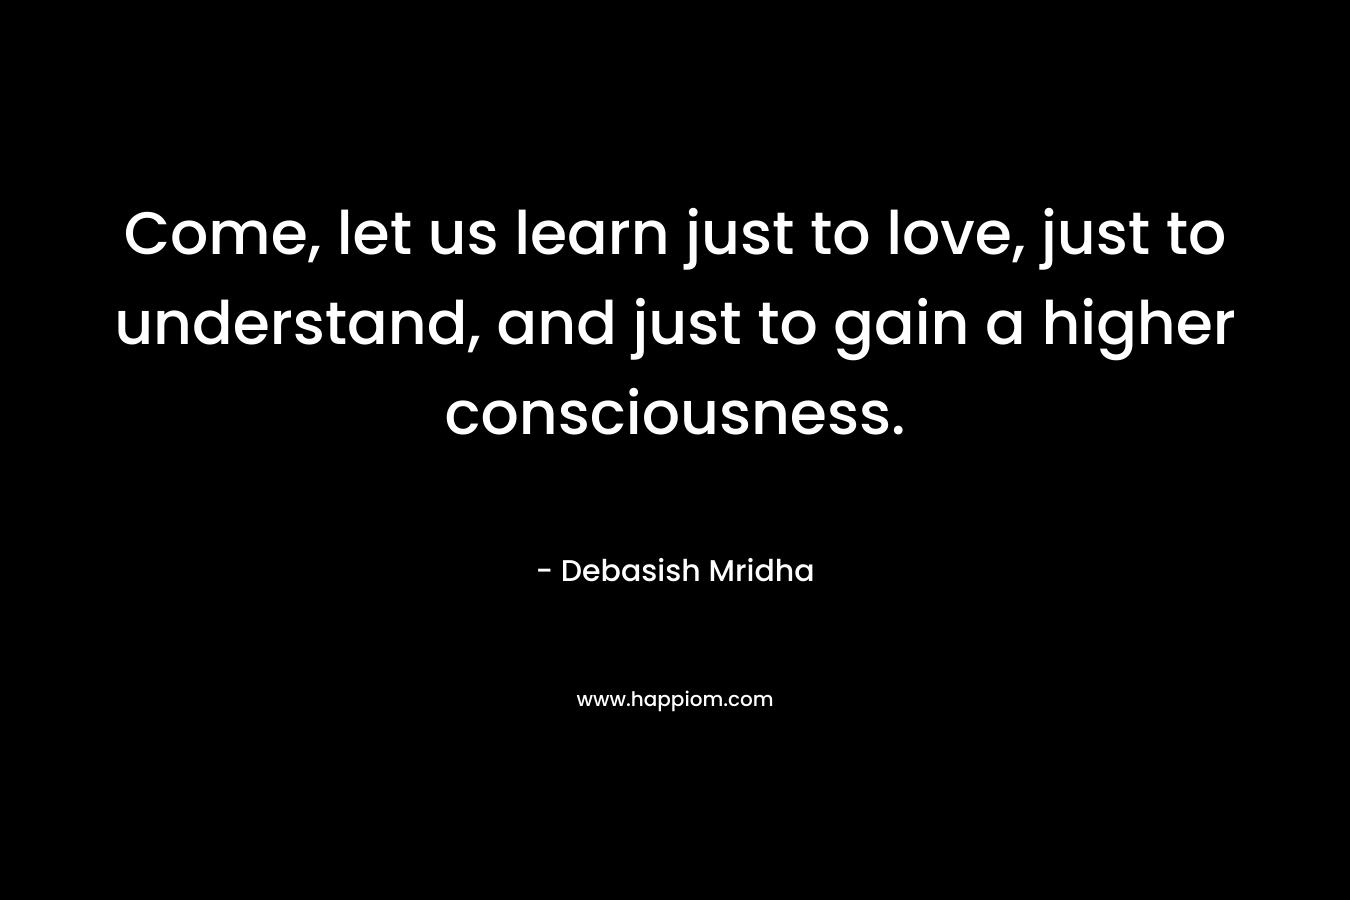 Come, let us learn just to love, just to understand, and just to gain a higher consciousness.